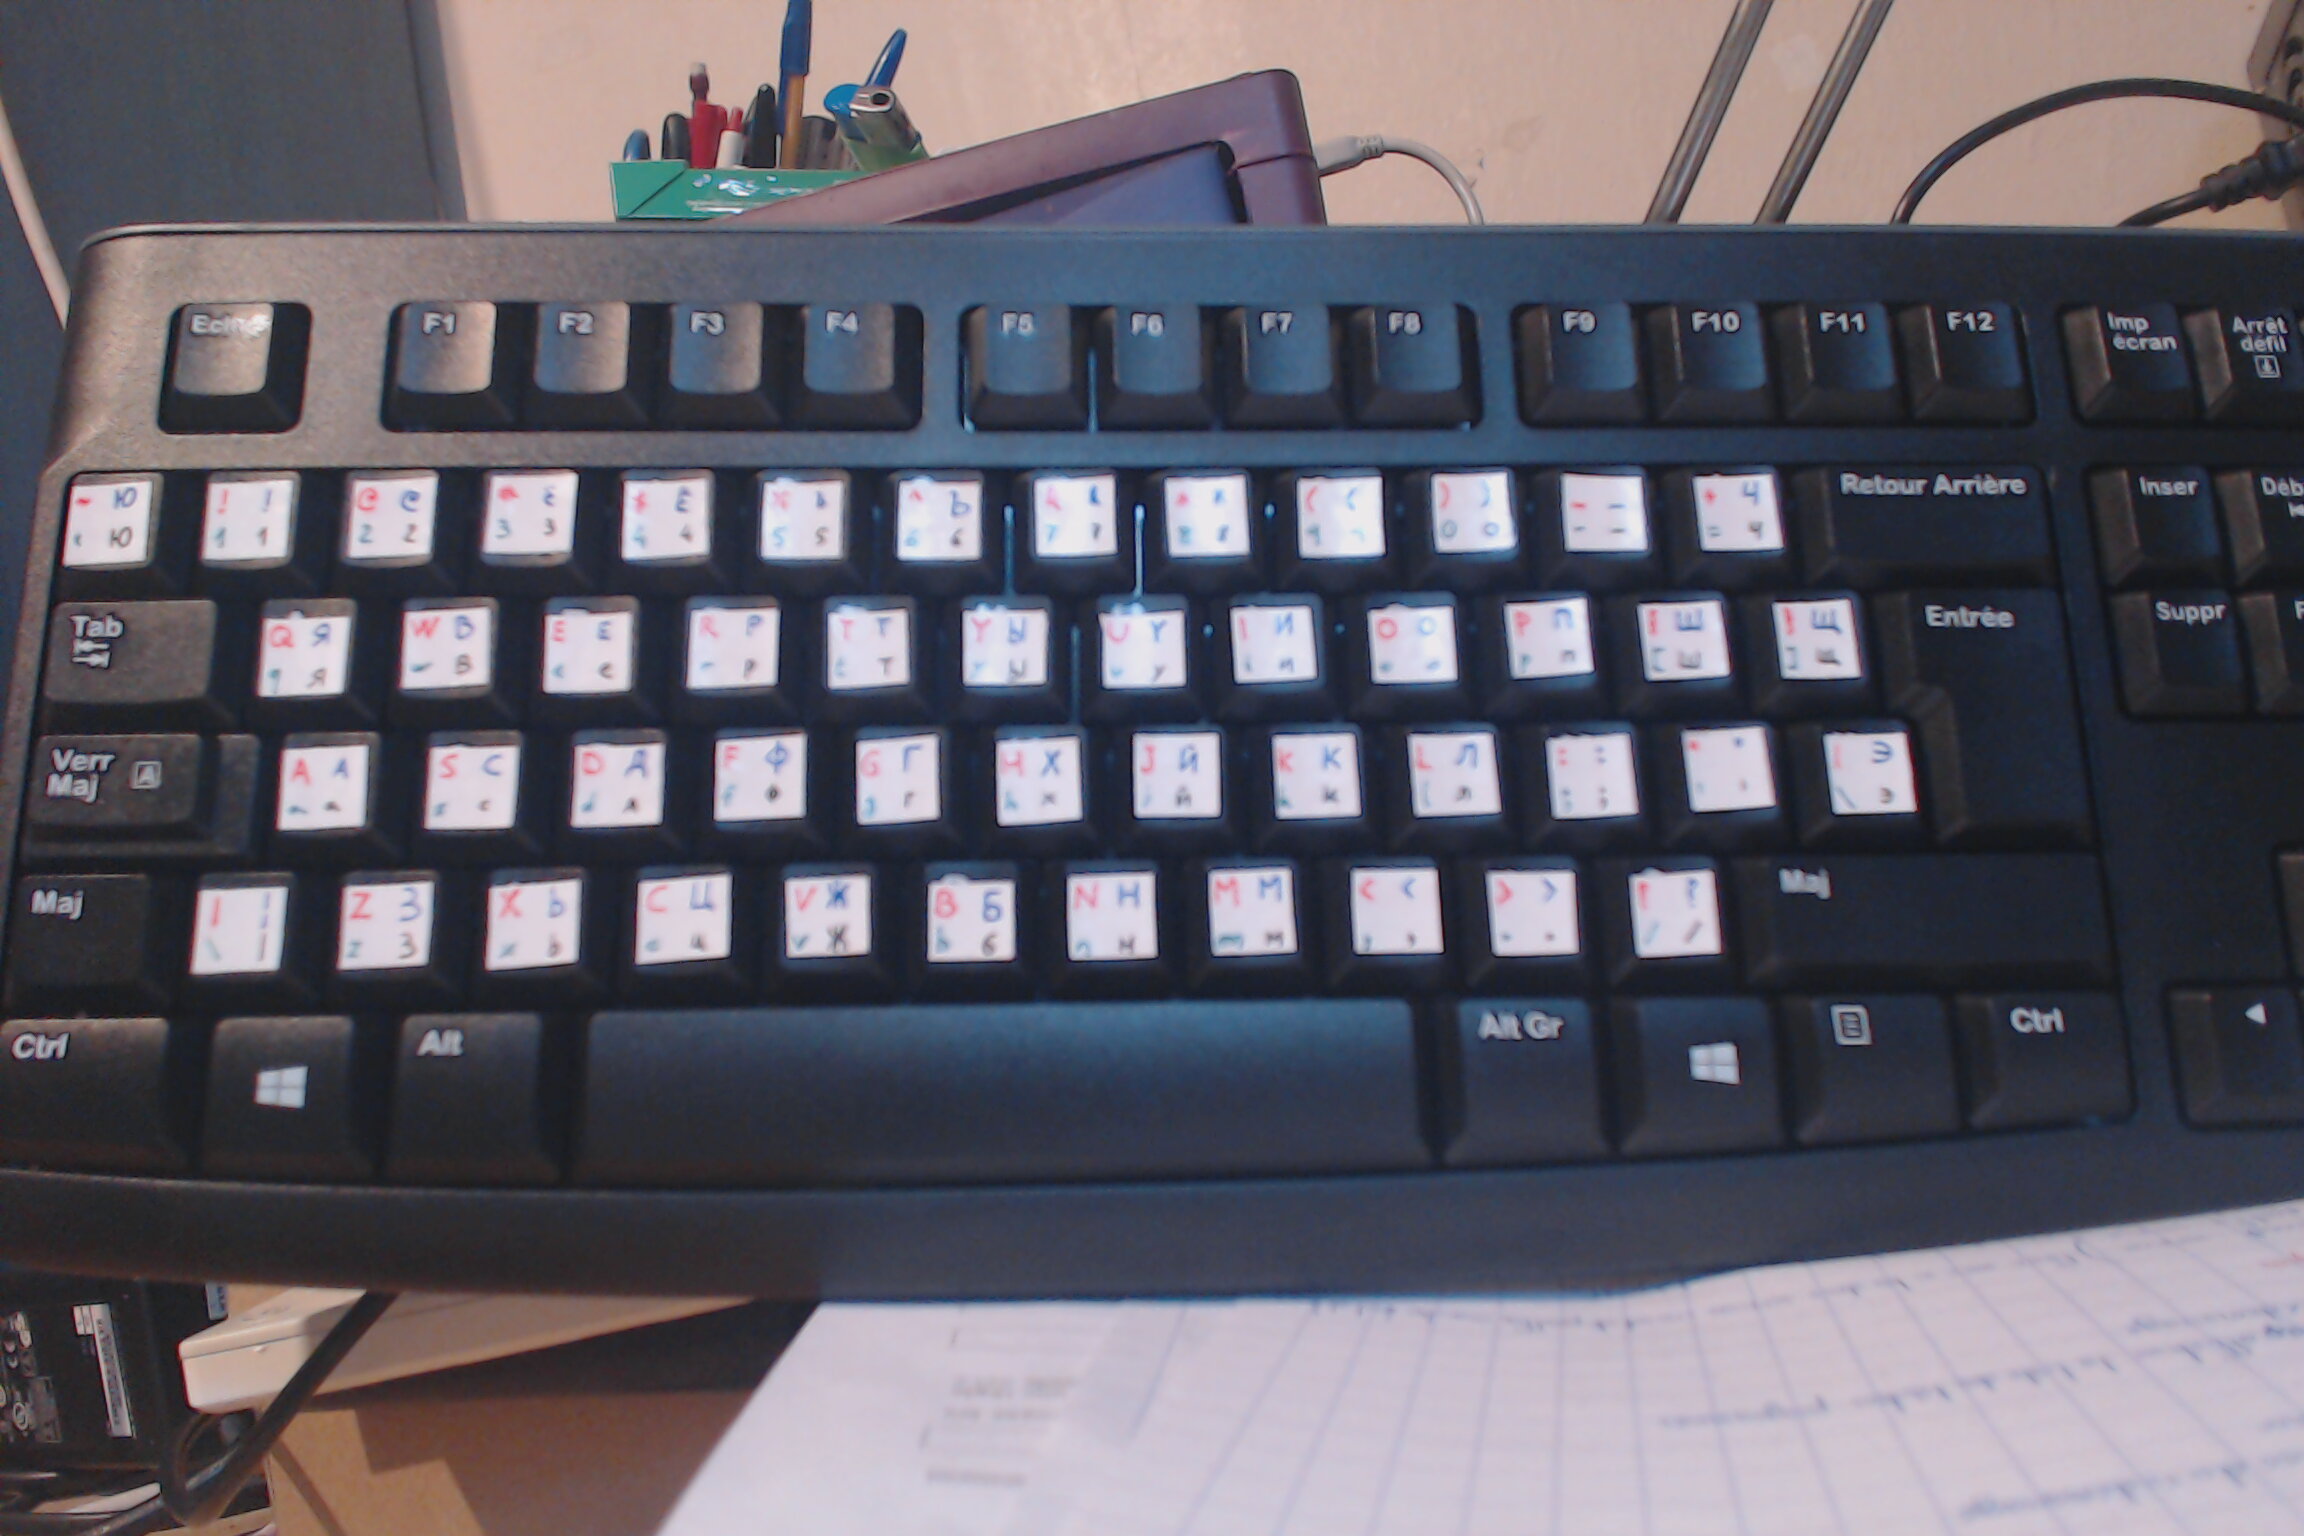 My hand-made Russian (phonetic) keyboards, image 6 of 14